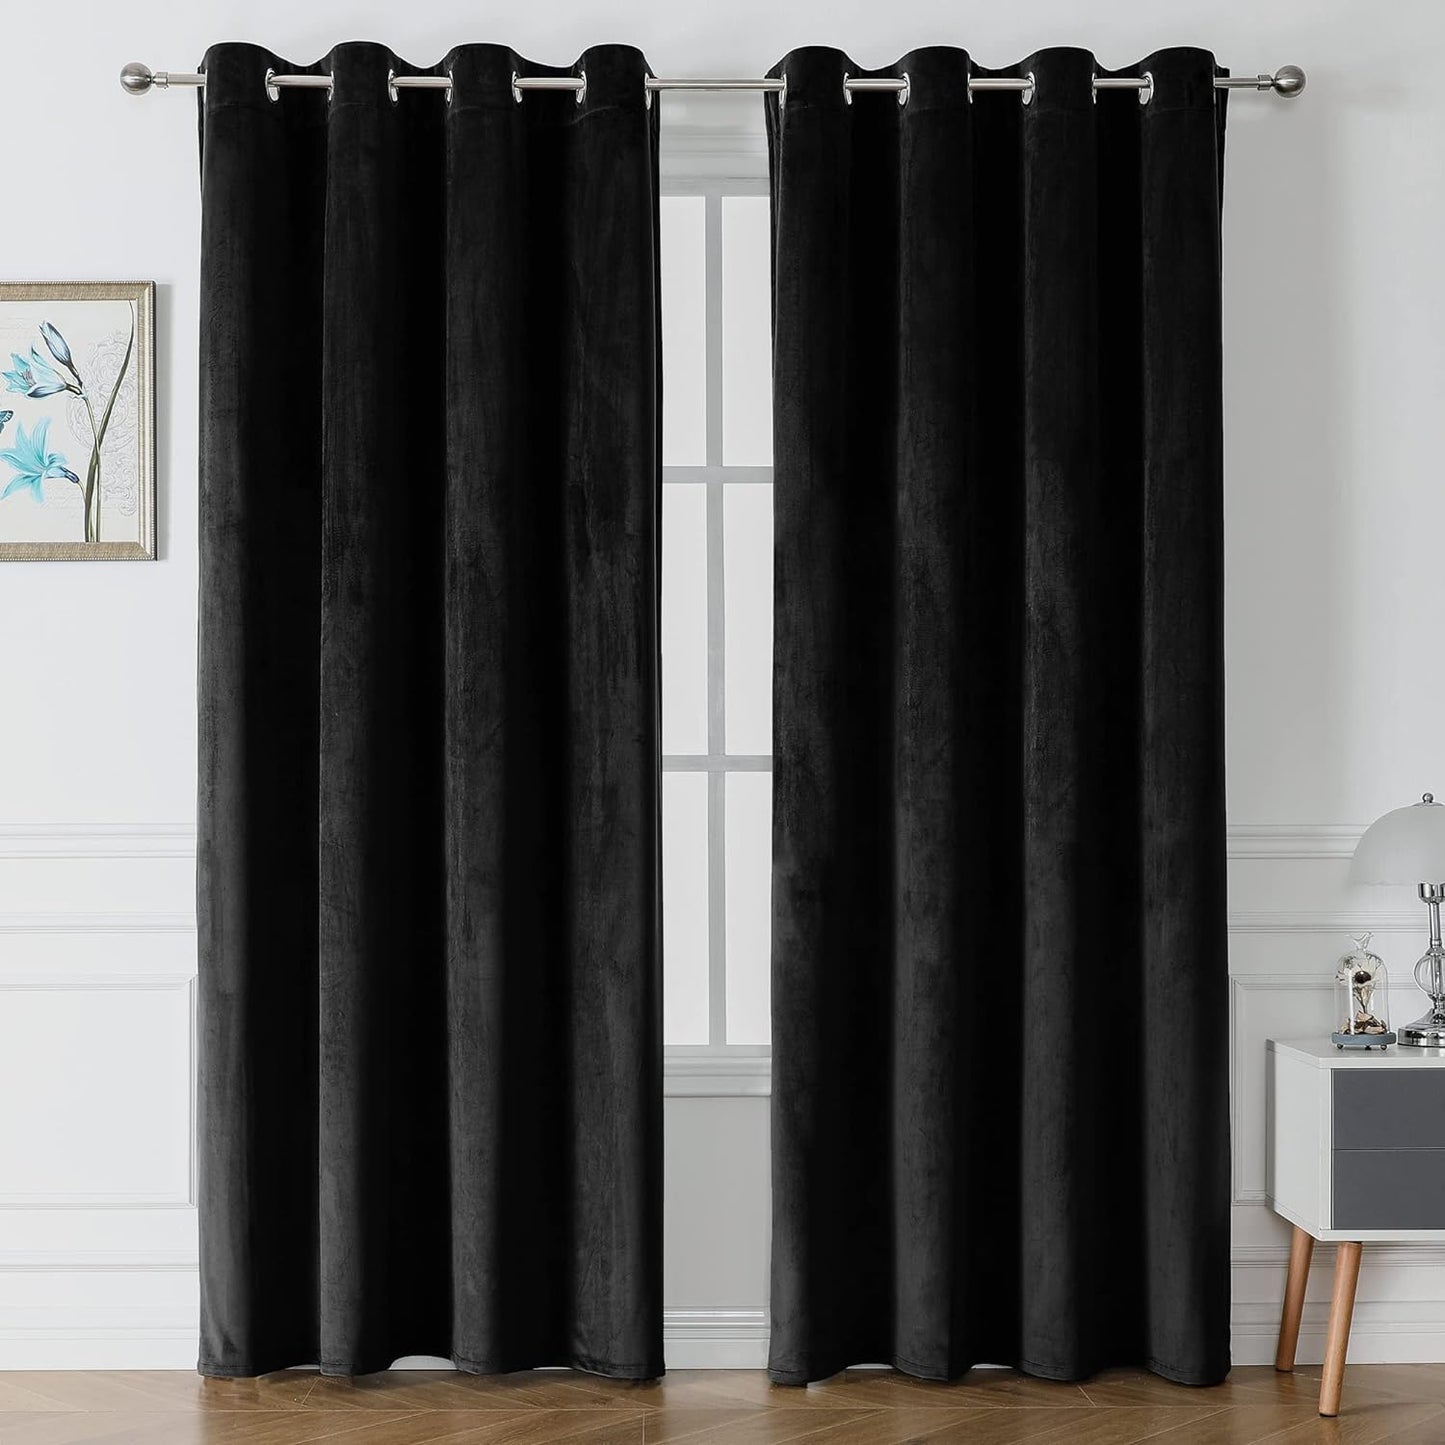 Victree Velvet Curtains for Bedroom, Blackout Curtains 52 X 84 Inch Length - Room Darkening Sun Light Blocking Grommet Window Drapes for Living Room, 2 Panels, Navy  Victree Black 52 X 72 Inches 